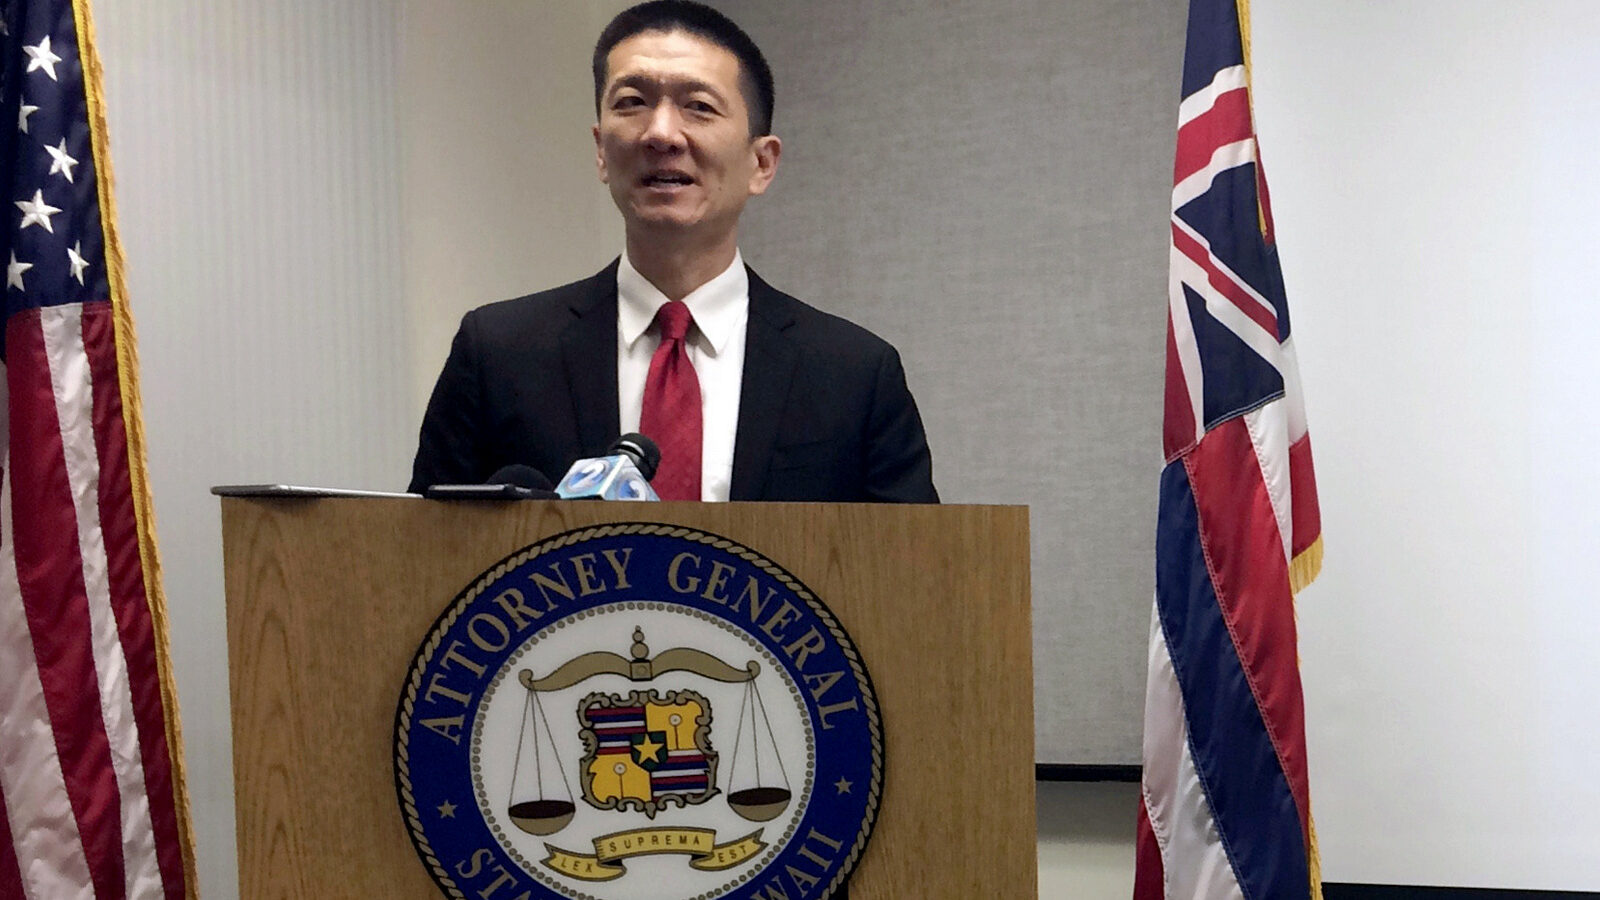 Hawaii Attorney General Doug Chin speaks at a news conference in Honolulu announcing the state of Hawaii has filed a lawsuit challenging President Donald Trump's revised travel ban. Feb. 3, 2017, (AP/Audrey McAvoy)